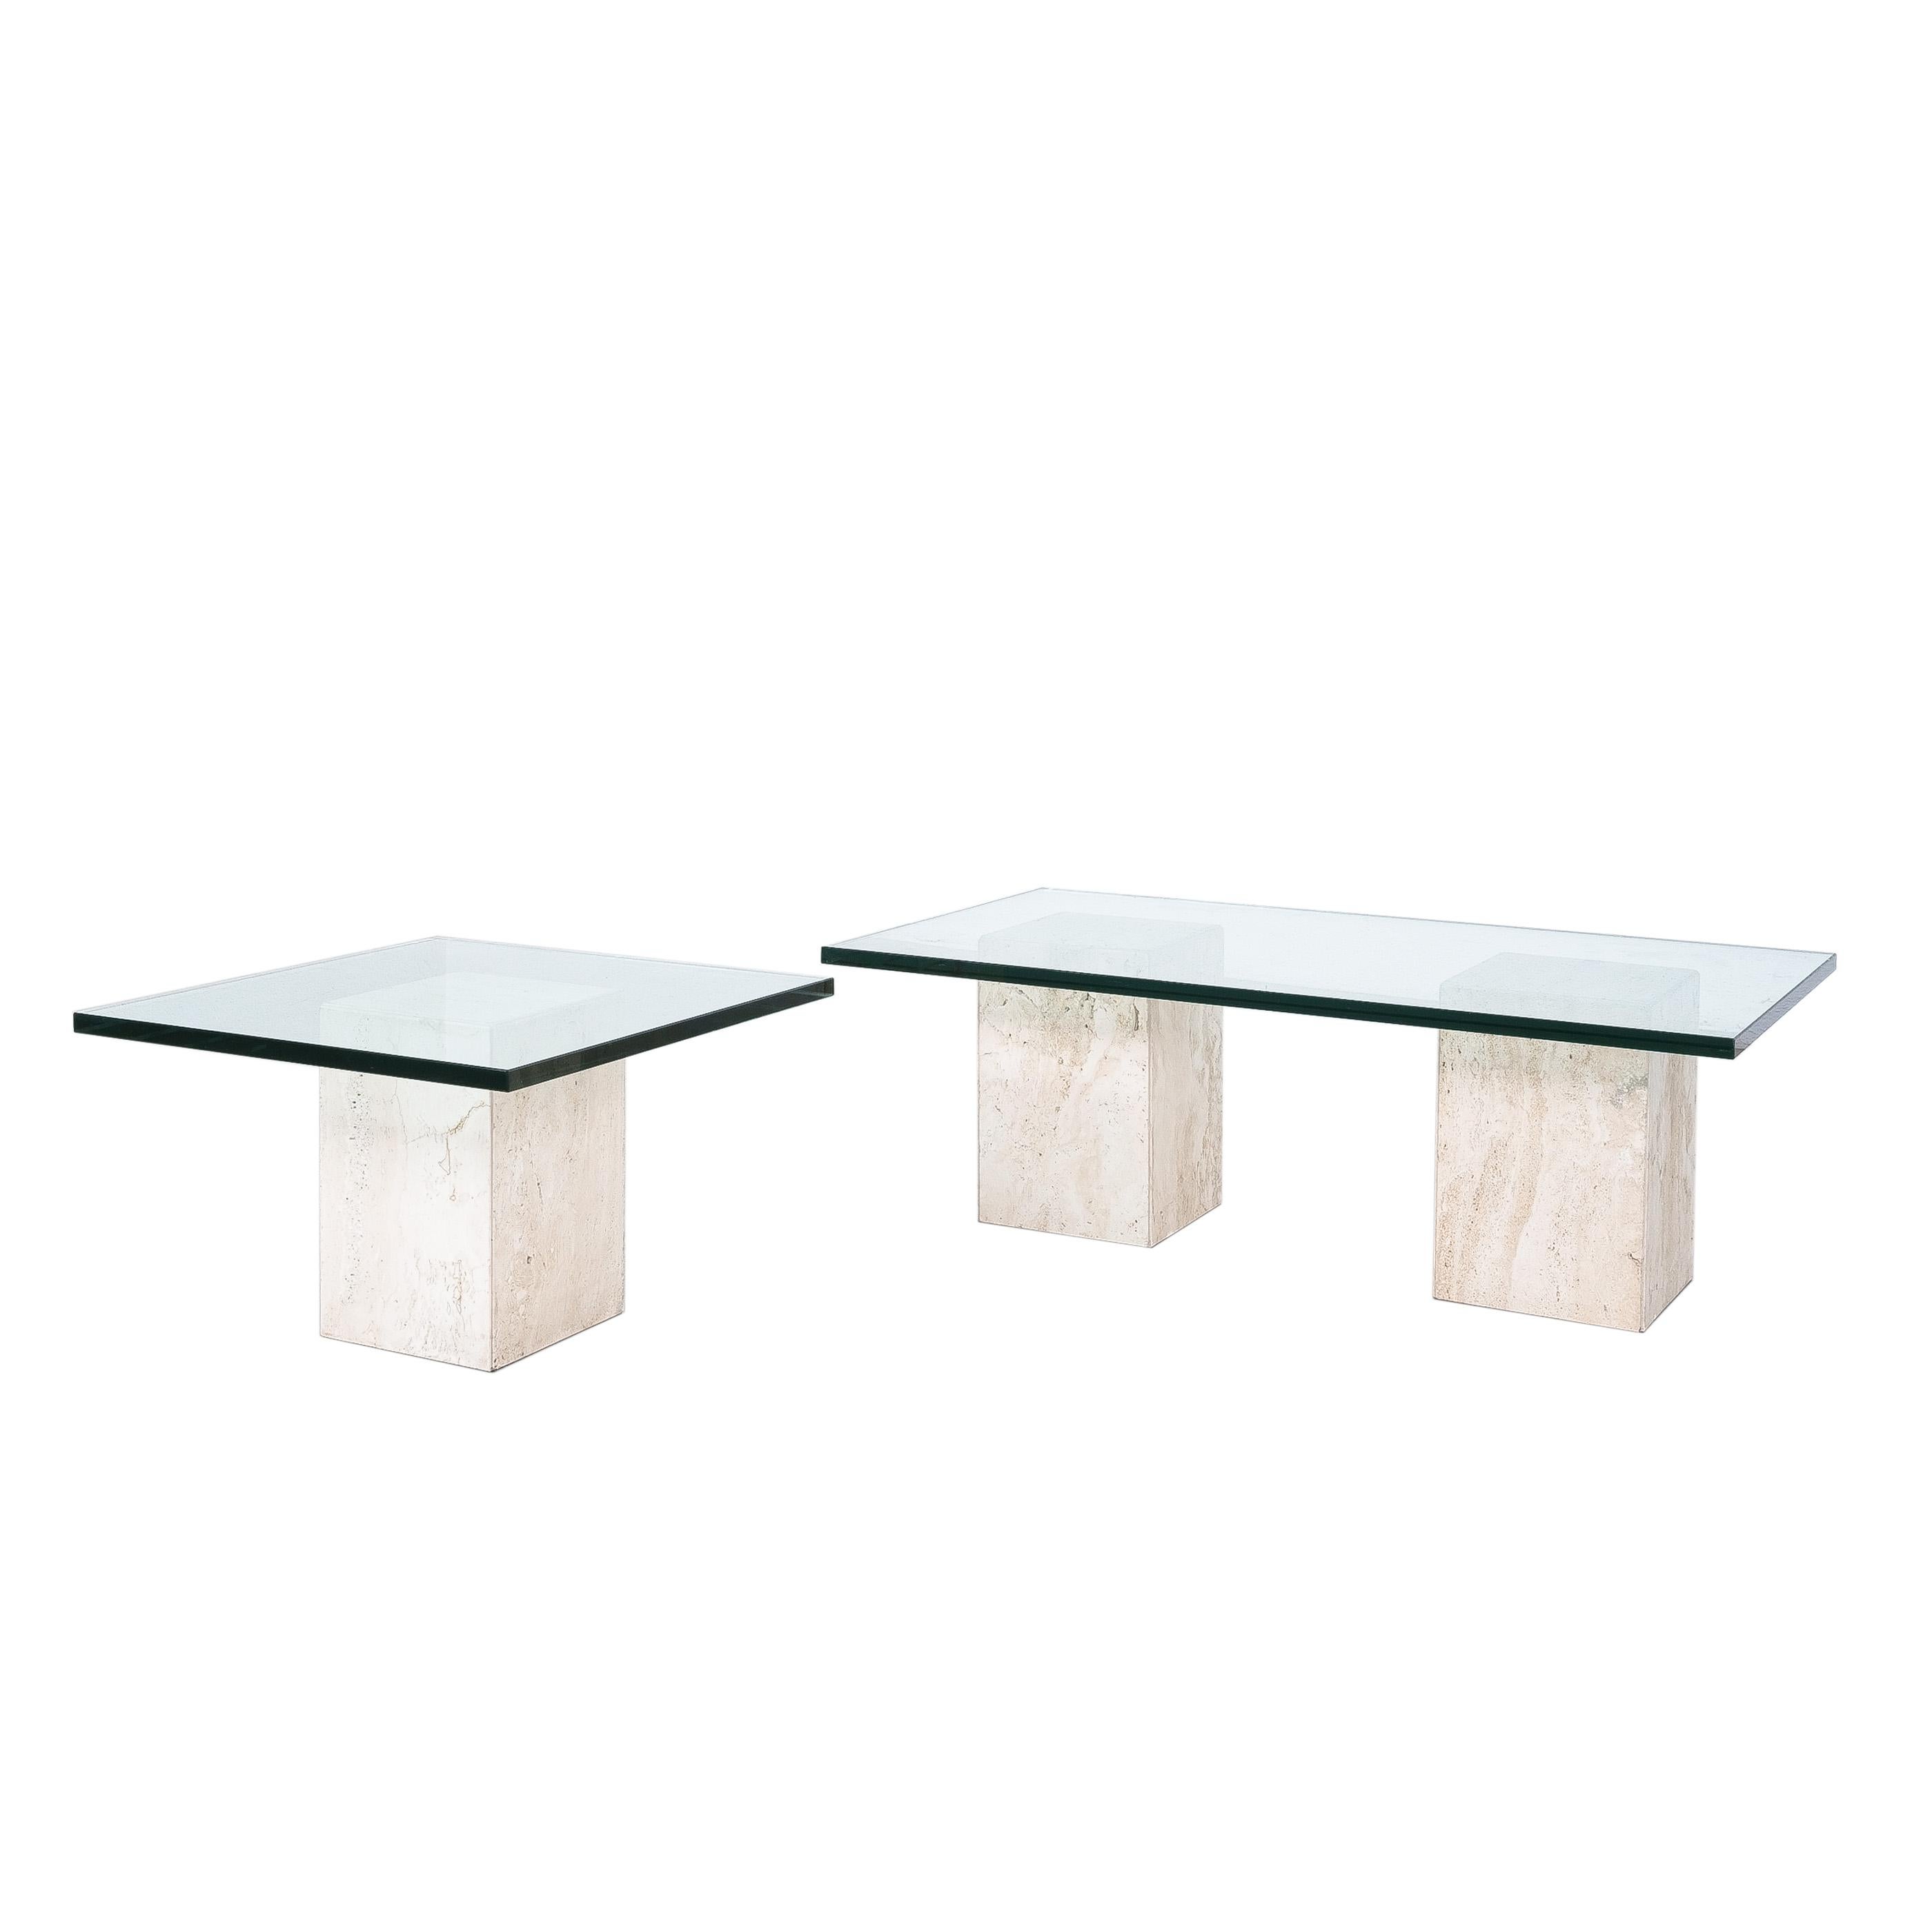 Travertine Tables from Three Blocks with Glass Tops, Italy, circa 1970 For Sale 10